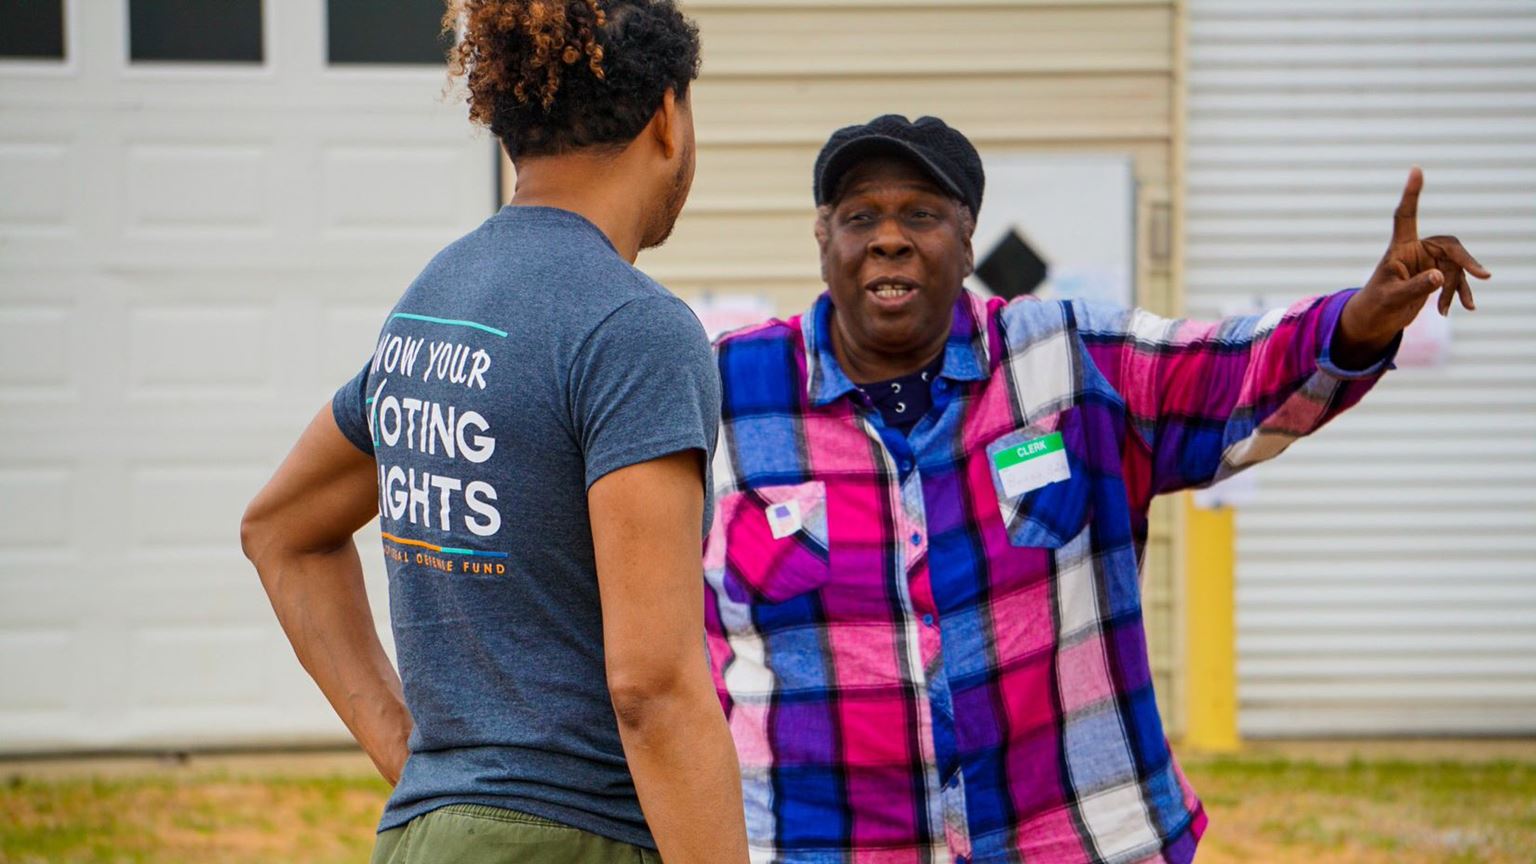 Volunteer engaged in a discussion with a voter